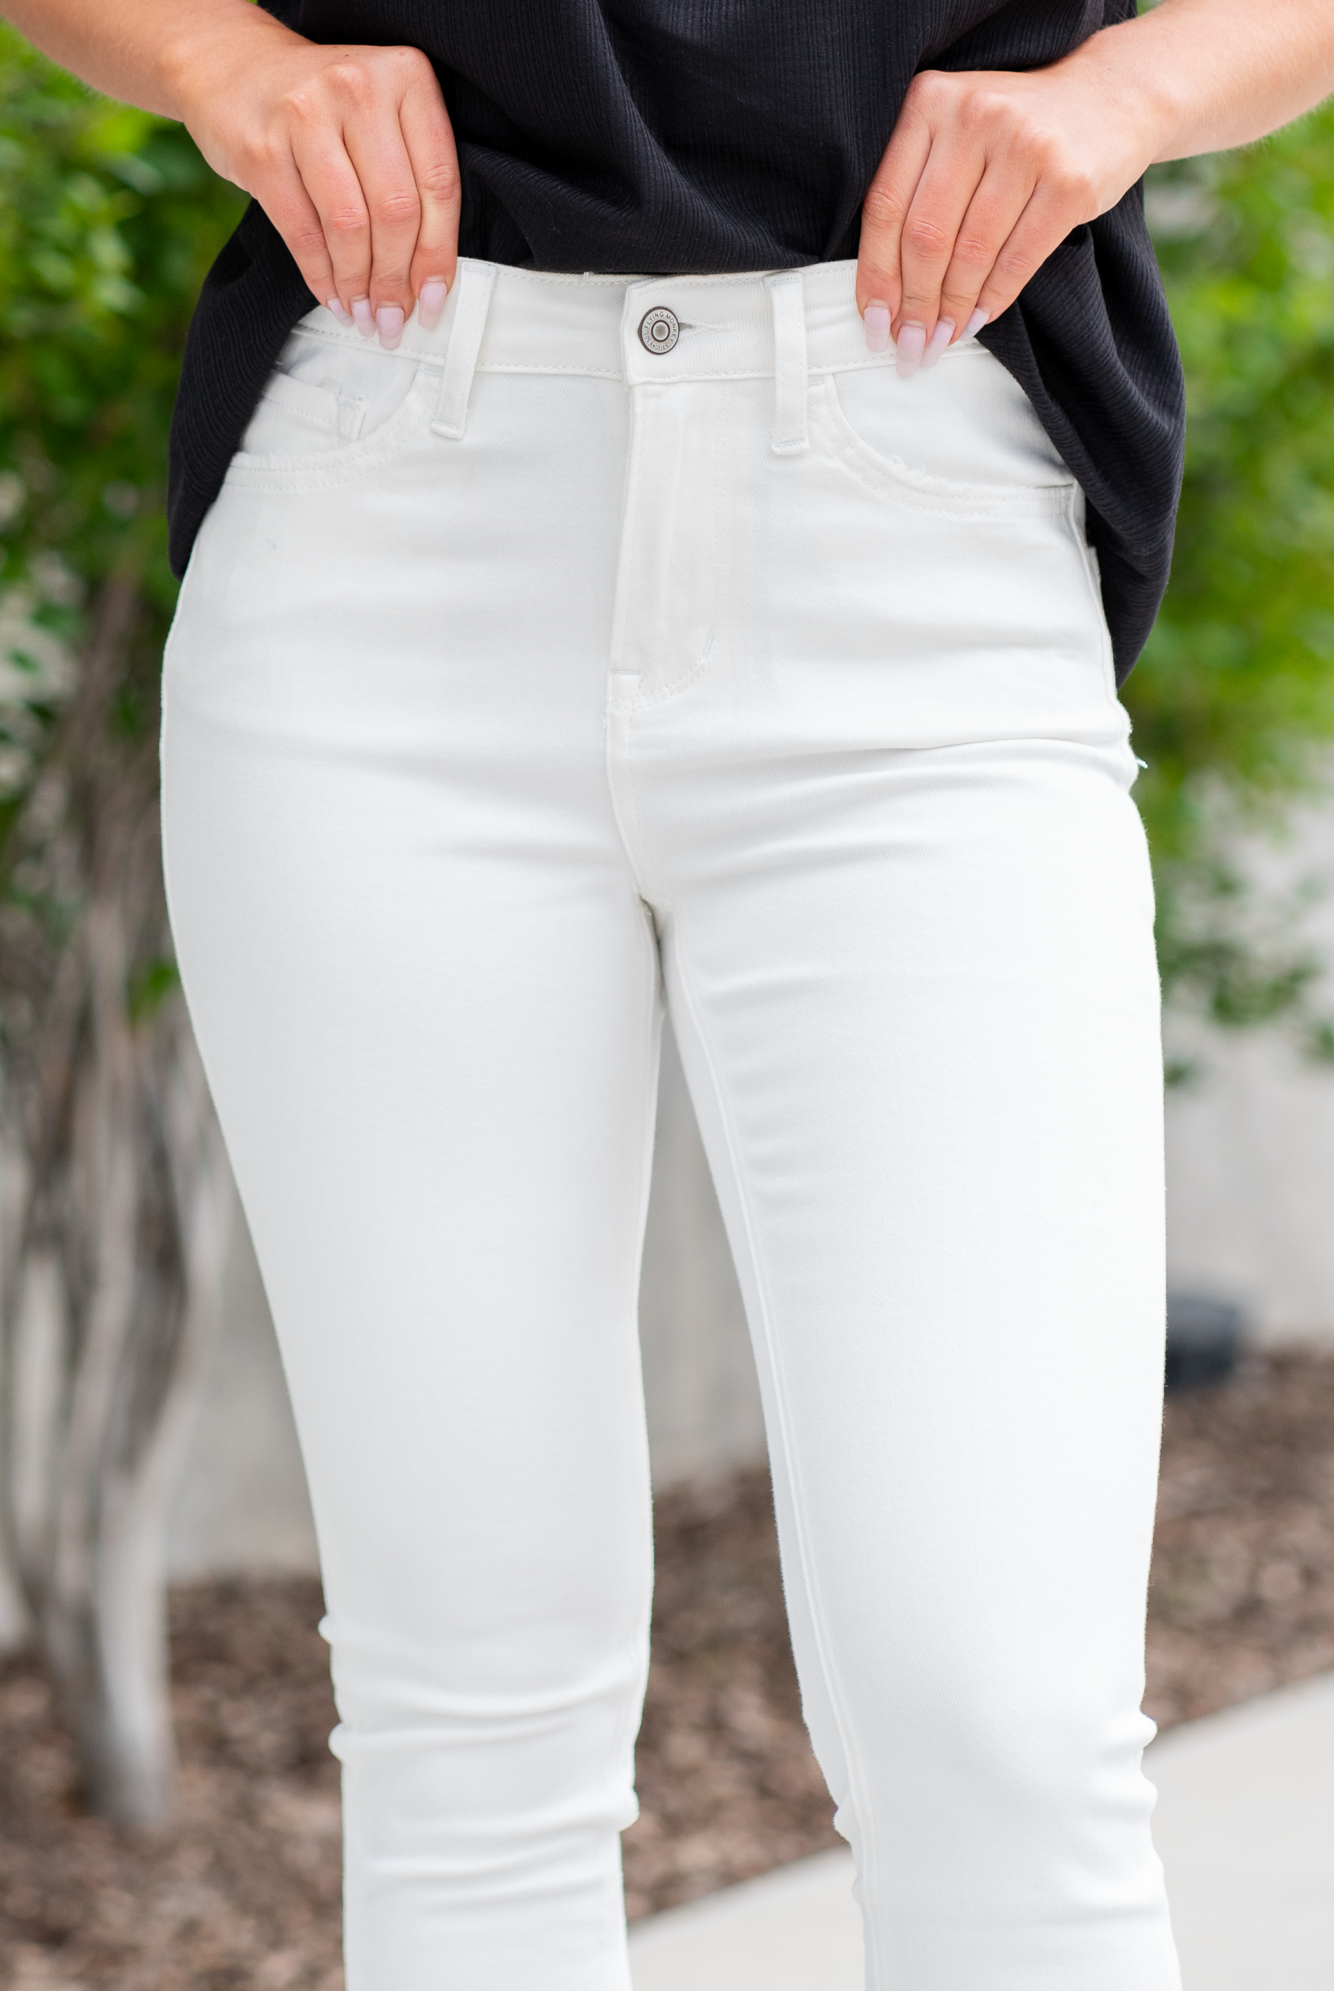 Flying Monkey Jeans Wash: White Name: Contentment  Cut: Skinny, 28" Inseam* Rise: High Rise, 10" Front Rise* 93% COTTON 5% POLYESTER 2% SPANDEX Stitching: Classic Fly: Zipper Style #: F4688 Contact us for any additional measurements or sizing.    *Measured on the smallest size, measurements may vary by size. 